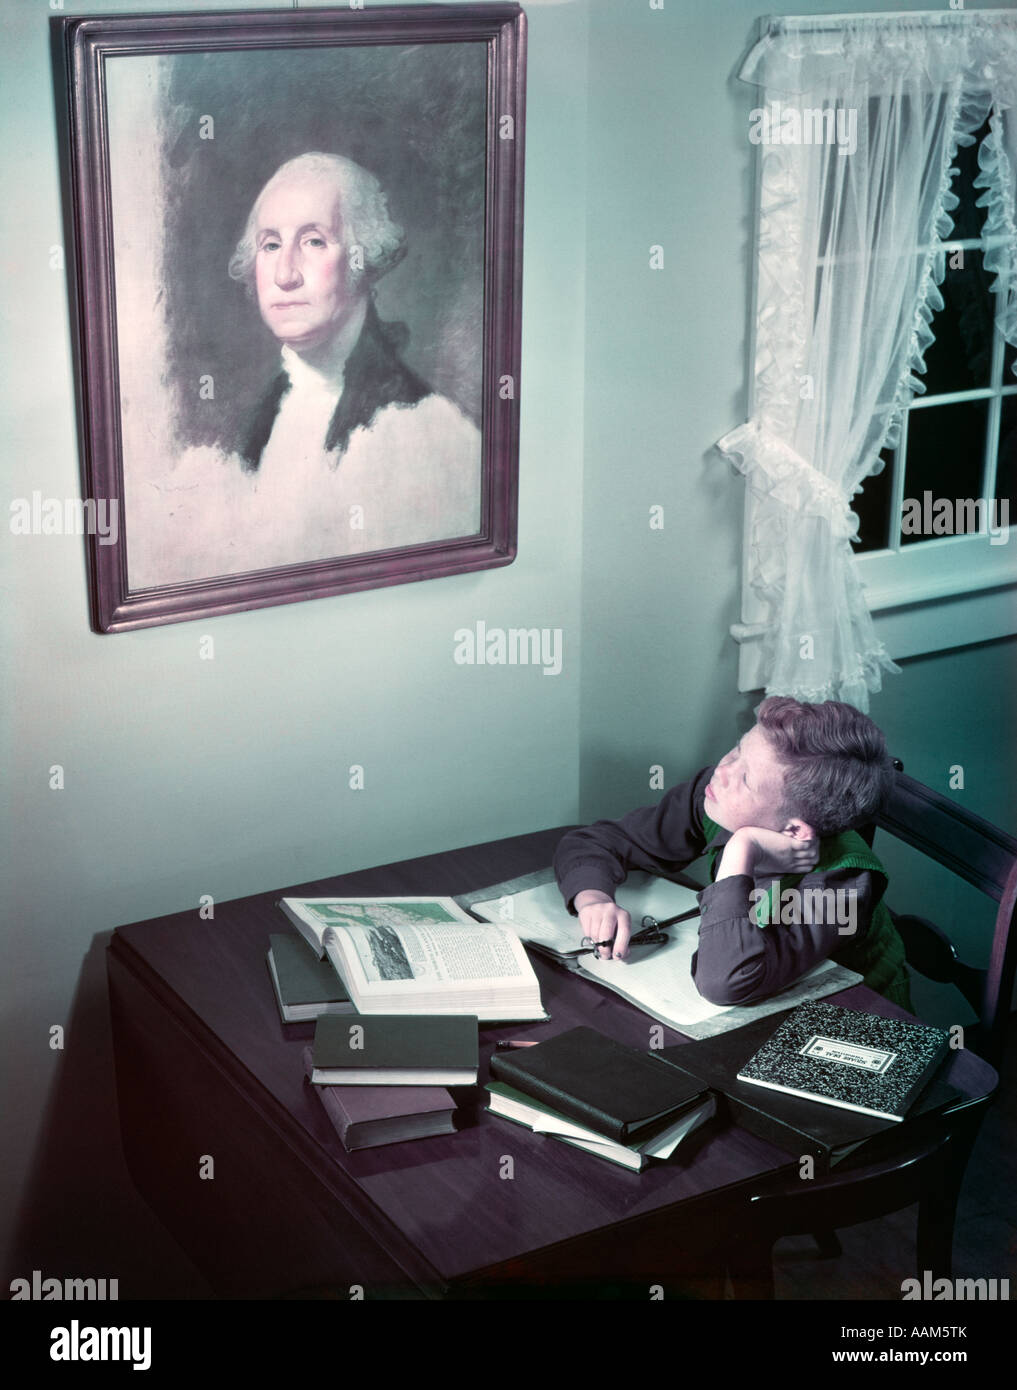 1940s 1950s BOY AT DESK READING STUDYING LOOK UP AT PAINTING ON WALL OF GEORGE WASHINGTON HISTORY PATRIOTISM Stock Photo